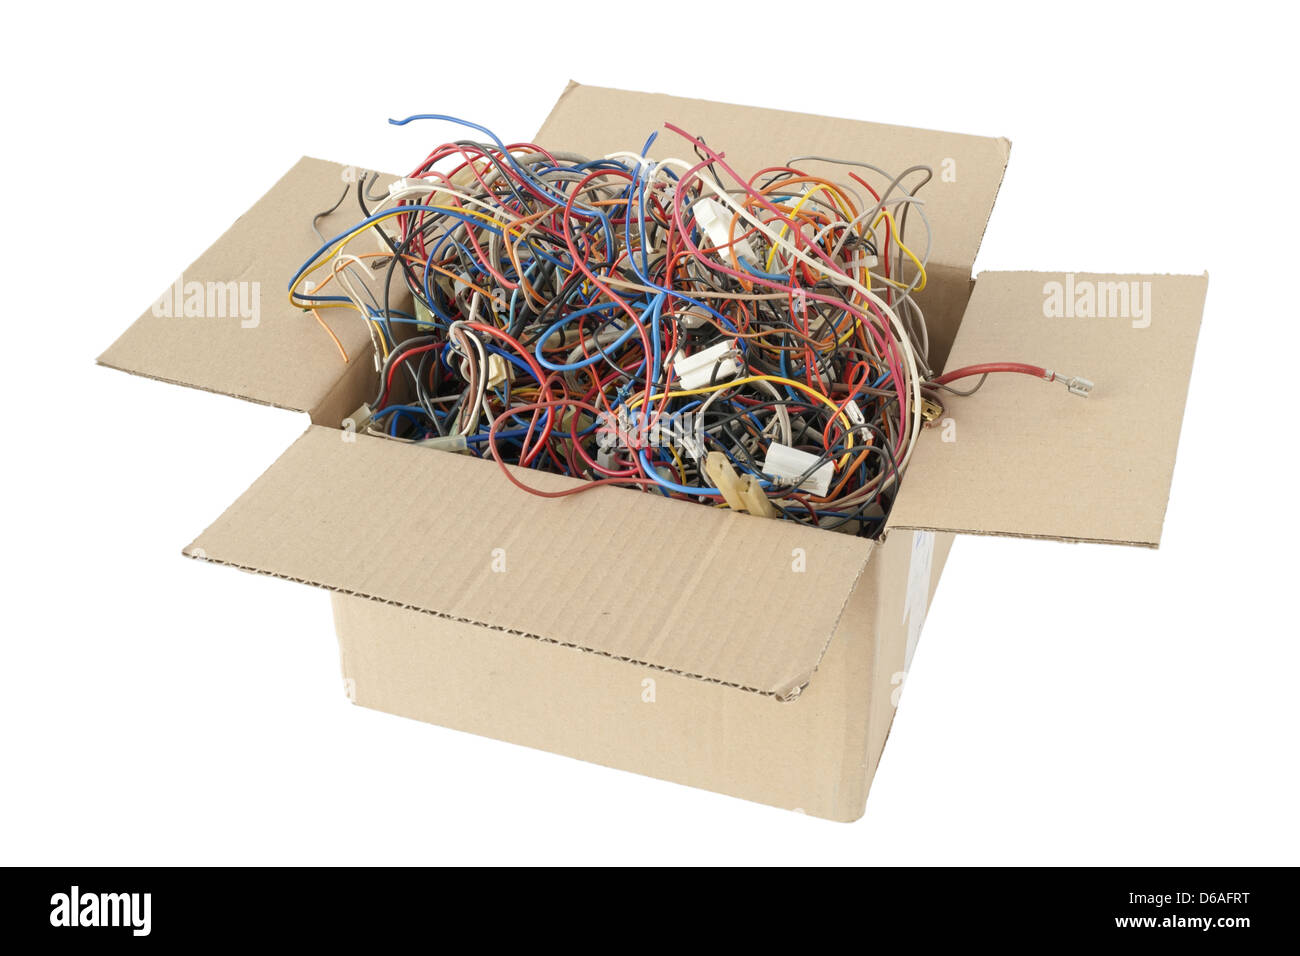 chaos of  defective pieces of copper wires Stock Photo